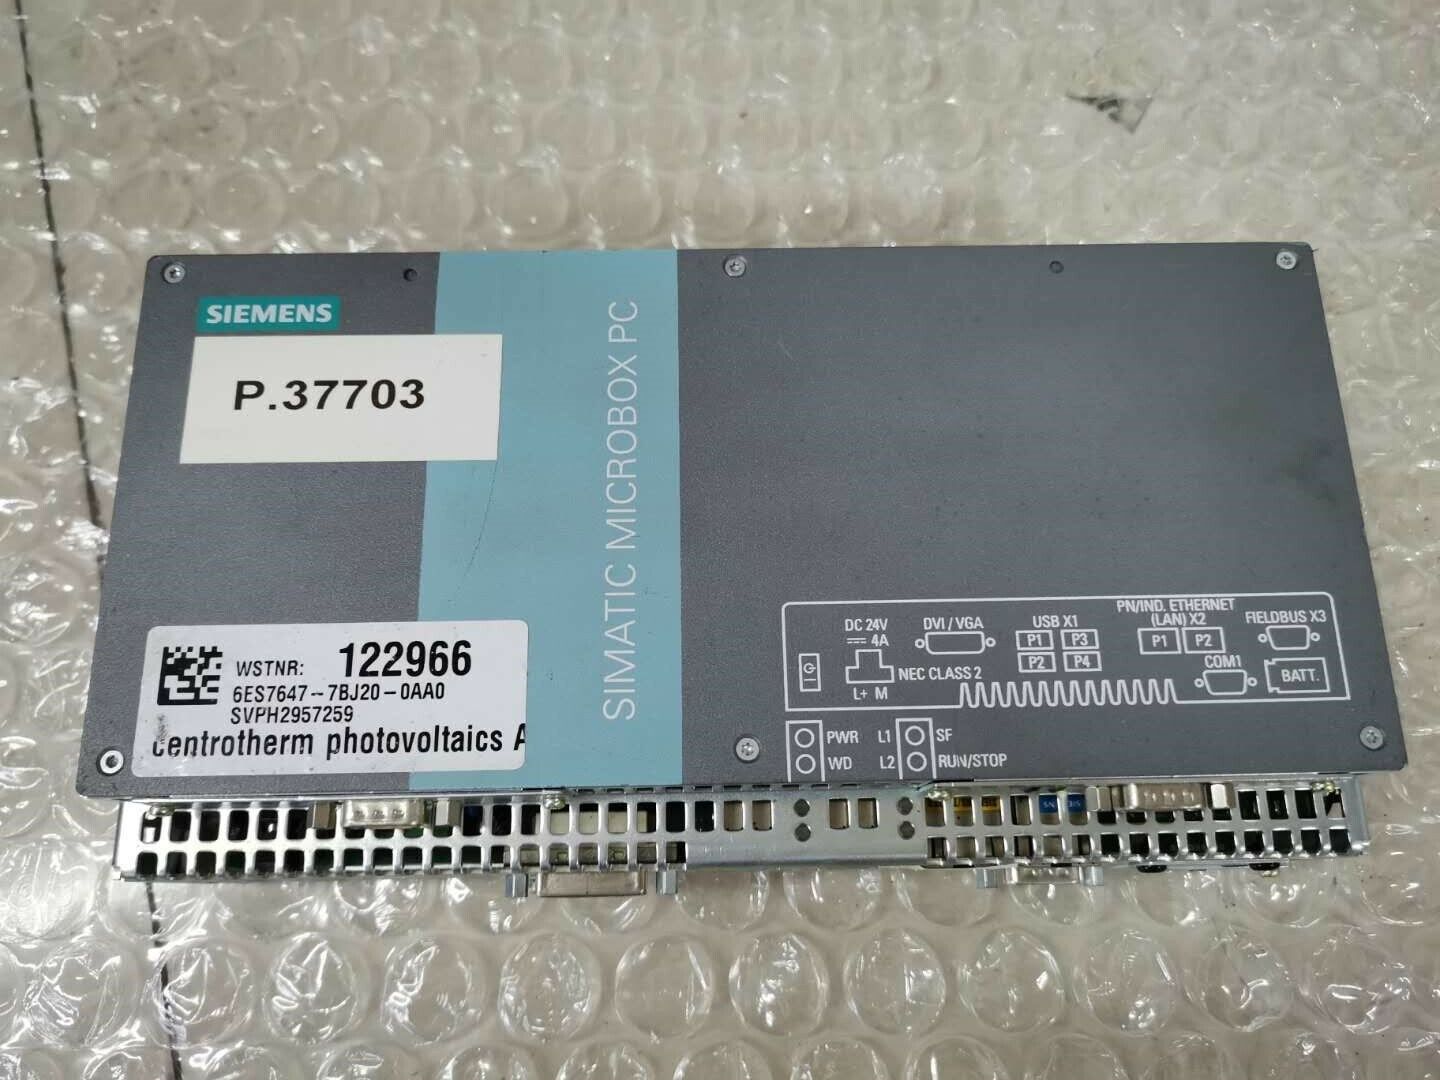 1pc Siemens 6ES7647-7BJ20-0AA0 By DHL or EMS with  90 warranty #G1n xh